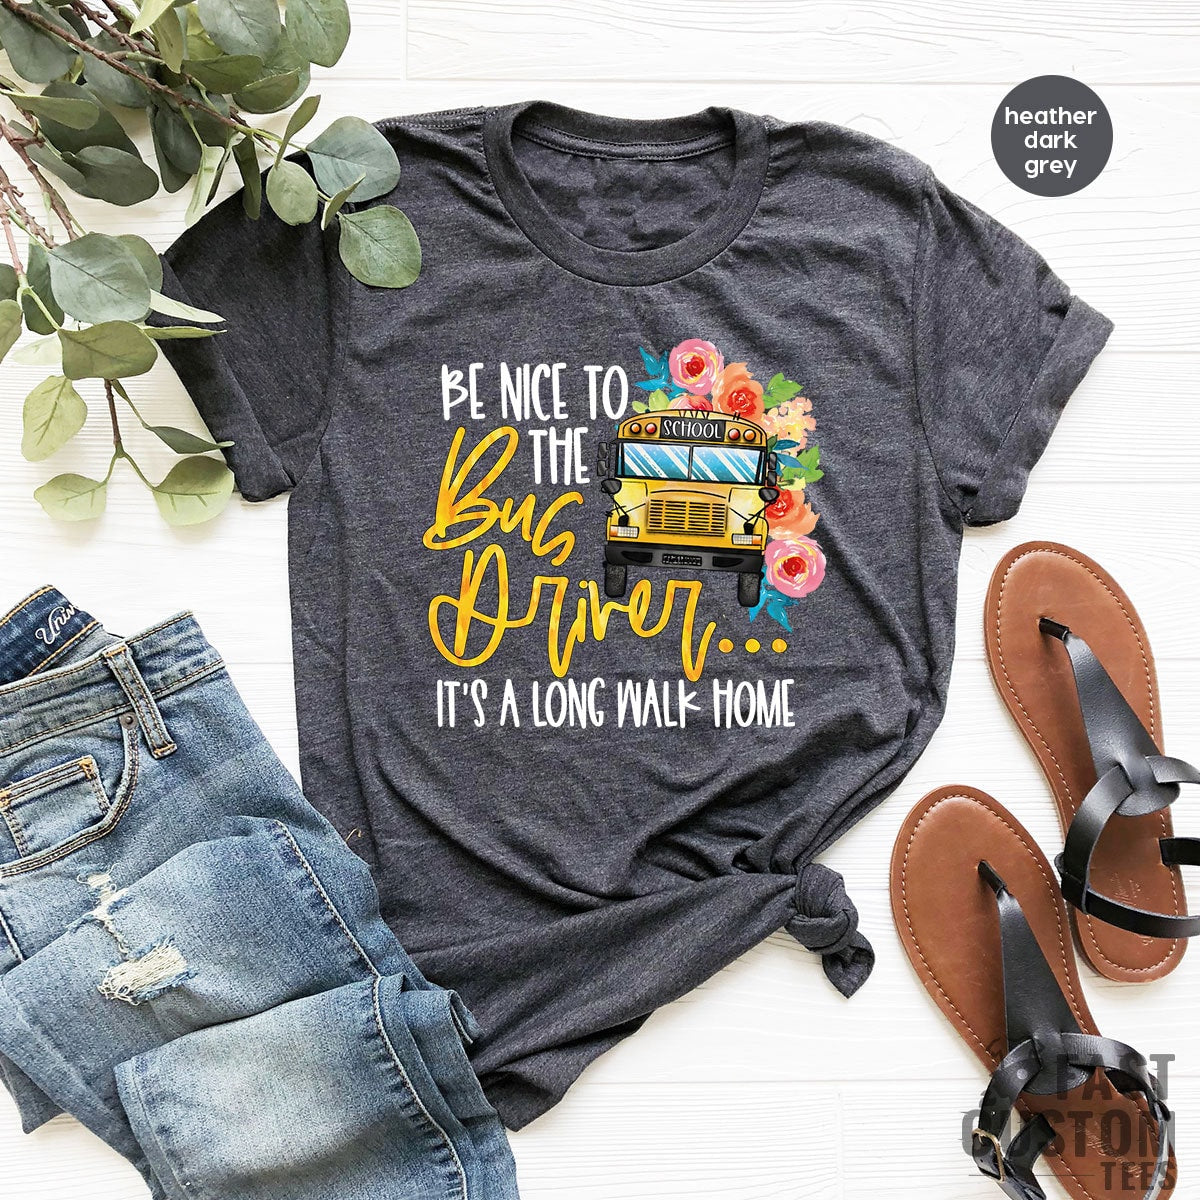 Funny School Bus Shirt, Be Nice To The Bus Driver Shirt, Funny School Shirt - Fastdeliverytees.com